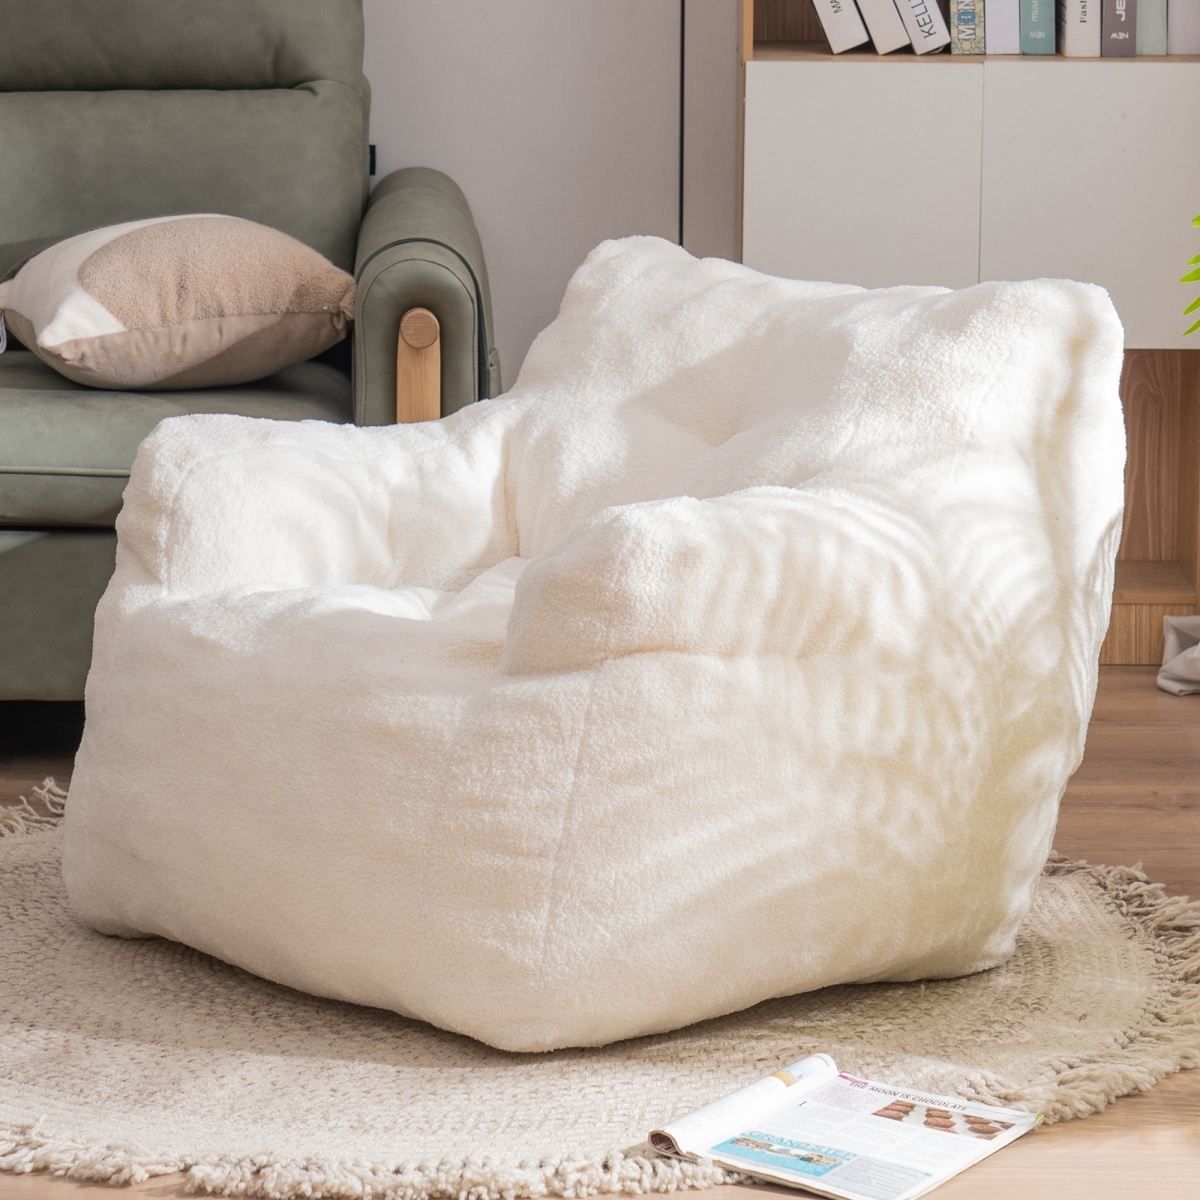 Big Rround Lazy Giant Sofa Cover Soft Fluffy Fur Bean Bag Bed Recliner  Cushion Cover Floor Corner Seat Couch Futon No Filling